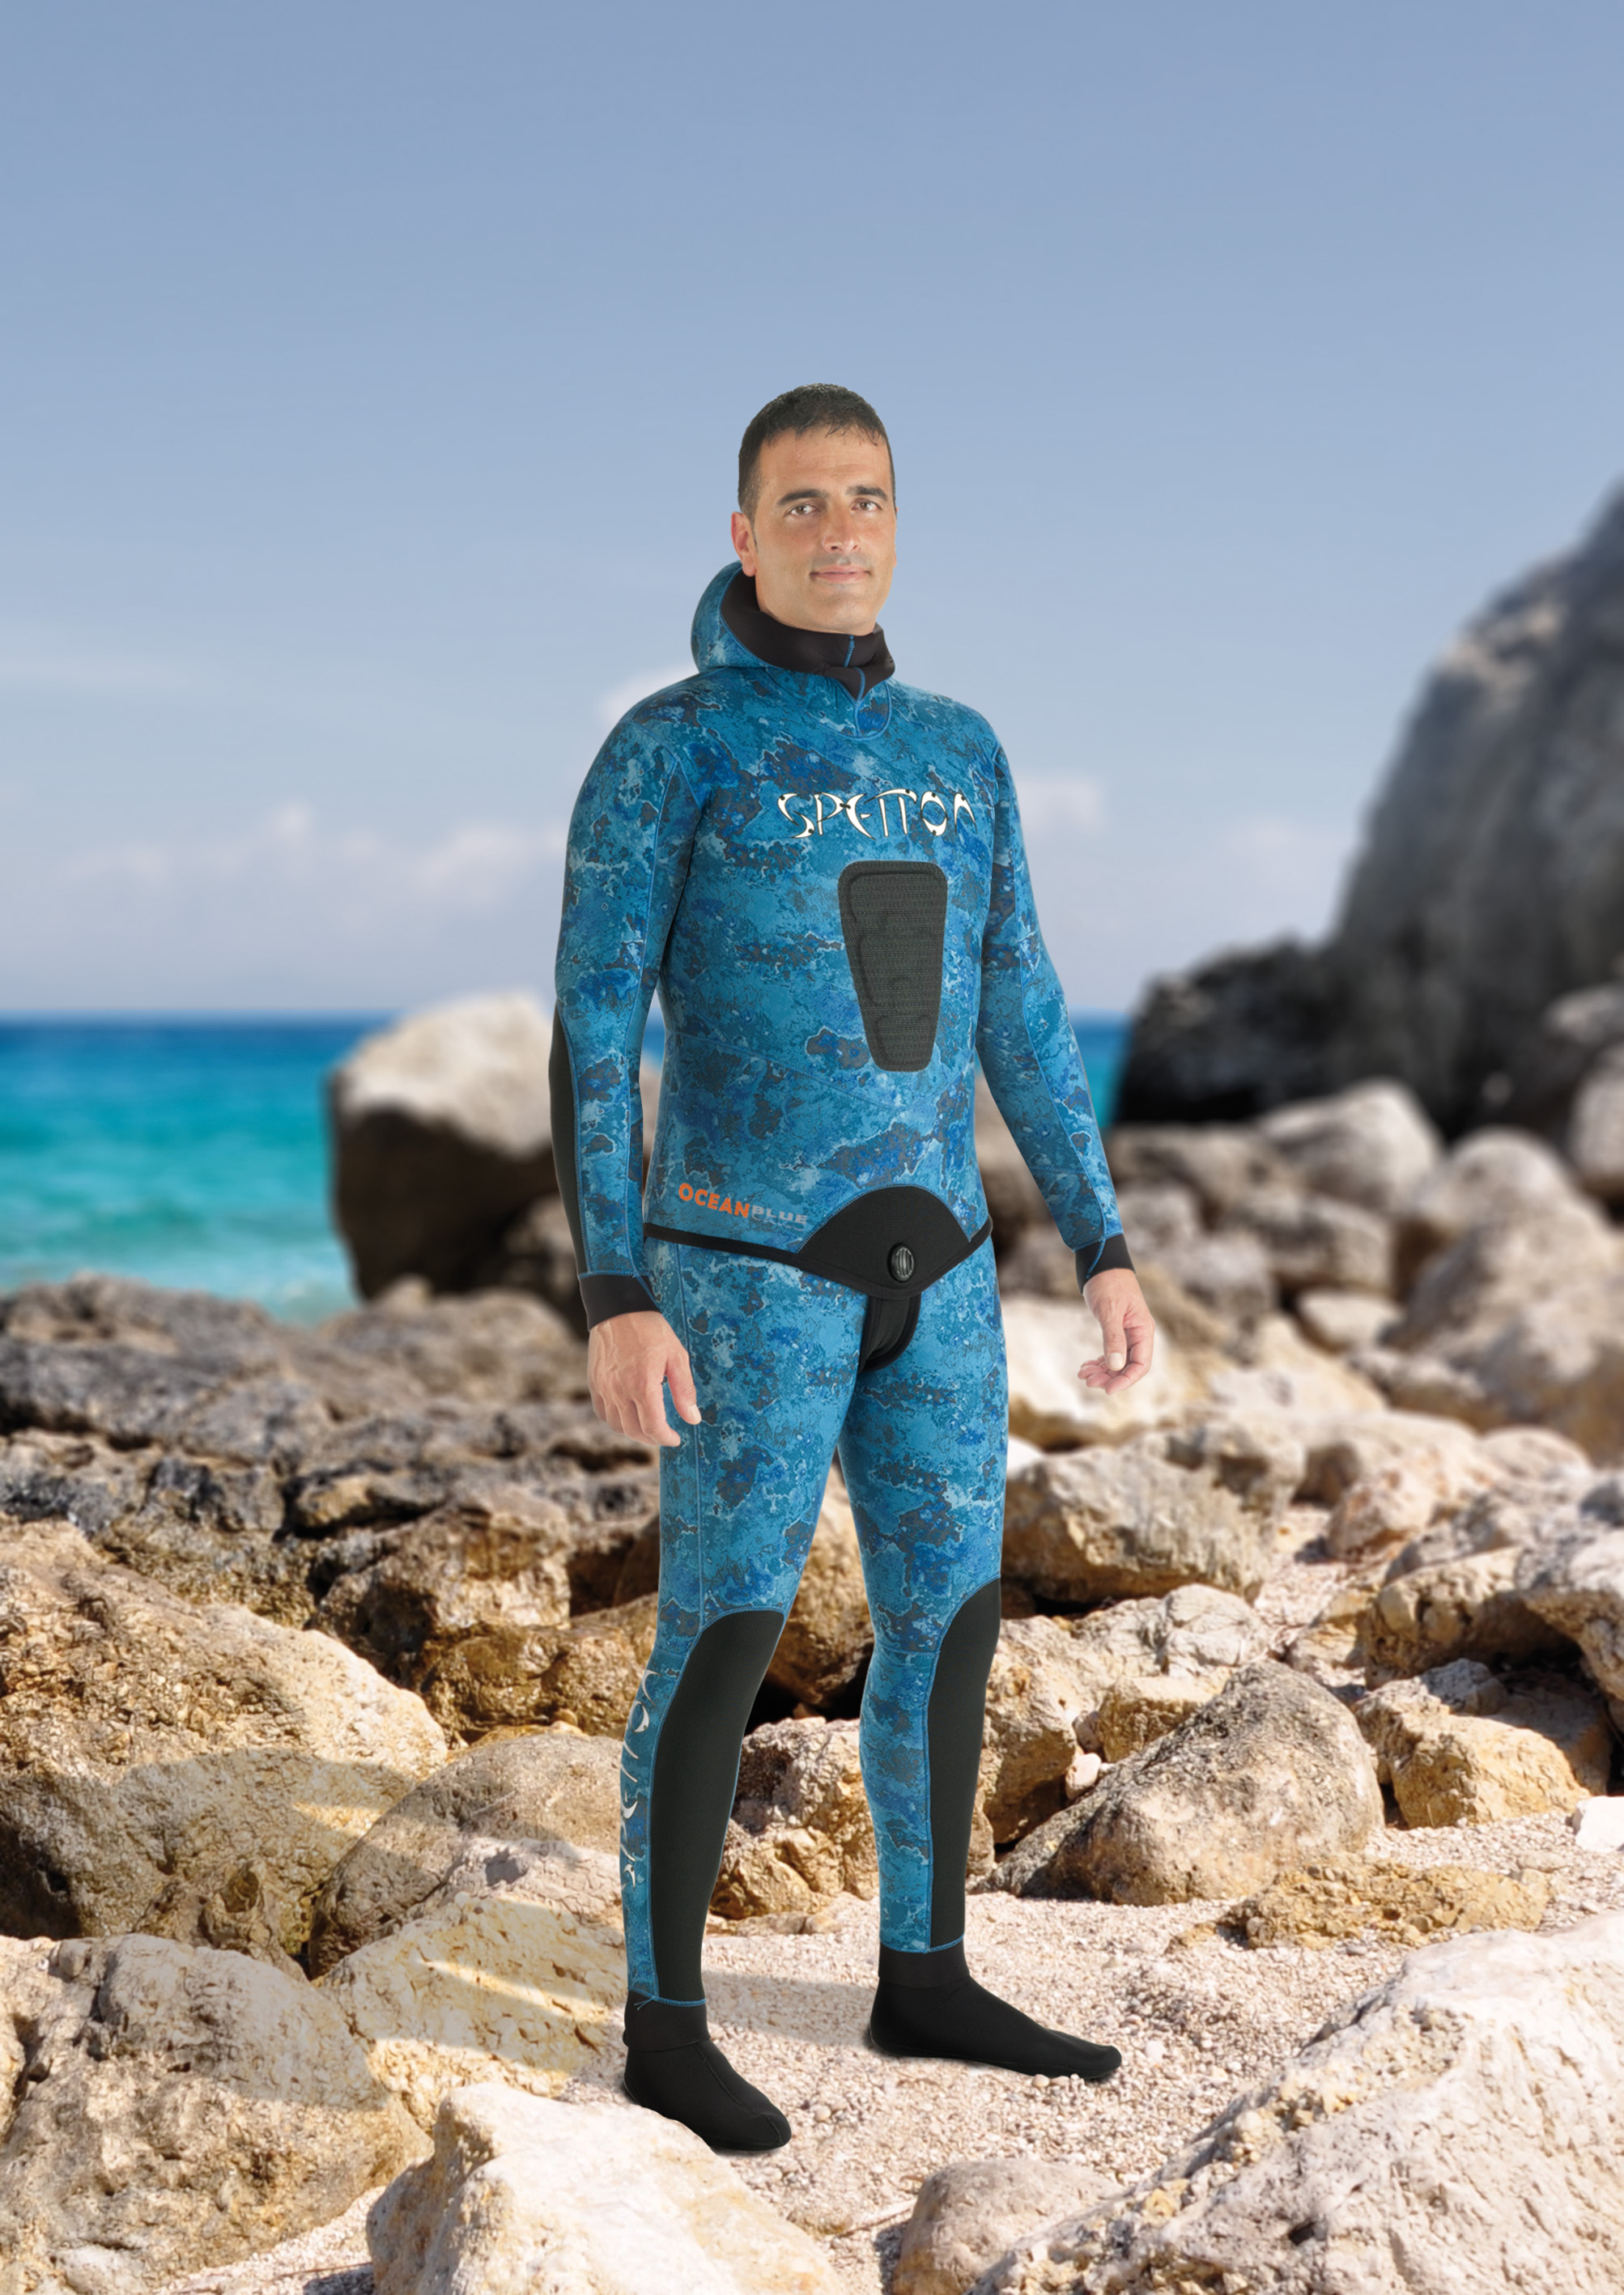 Spetton Usa - Spearfishing Gear, Equipment for the spearfishing and  underwater world - Official Spetton Distributors for Usa - Feel the  experience, Camo 1.5 or 3 mm wetsuit - Spetton Usa - Spearfishing Gear